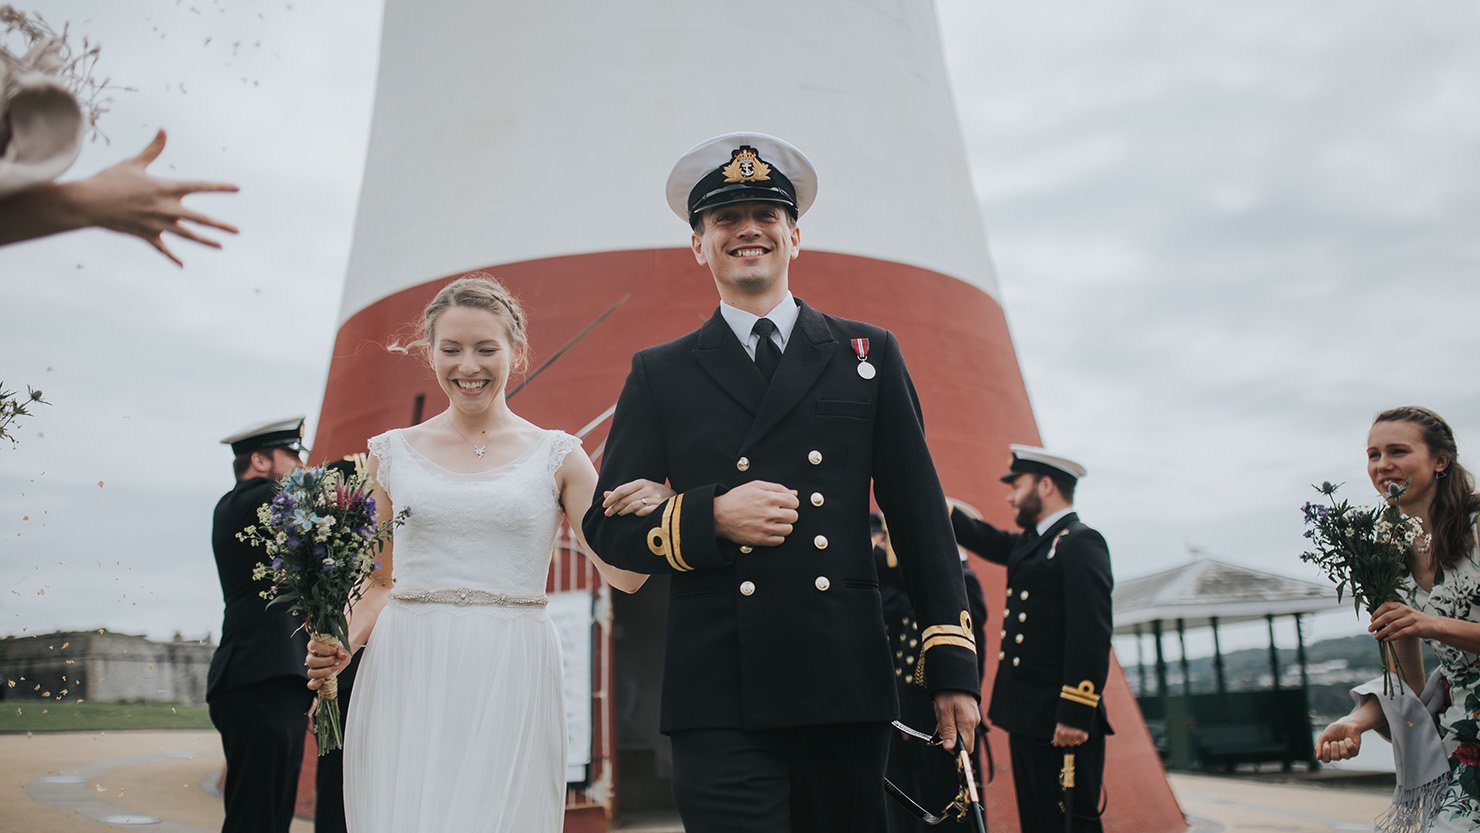 Ceremonies at Smeaton’s Tower